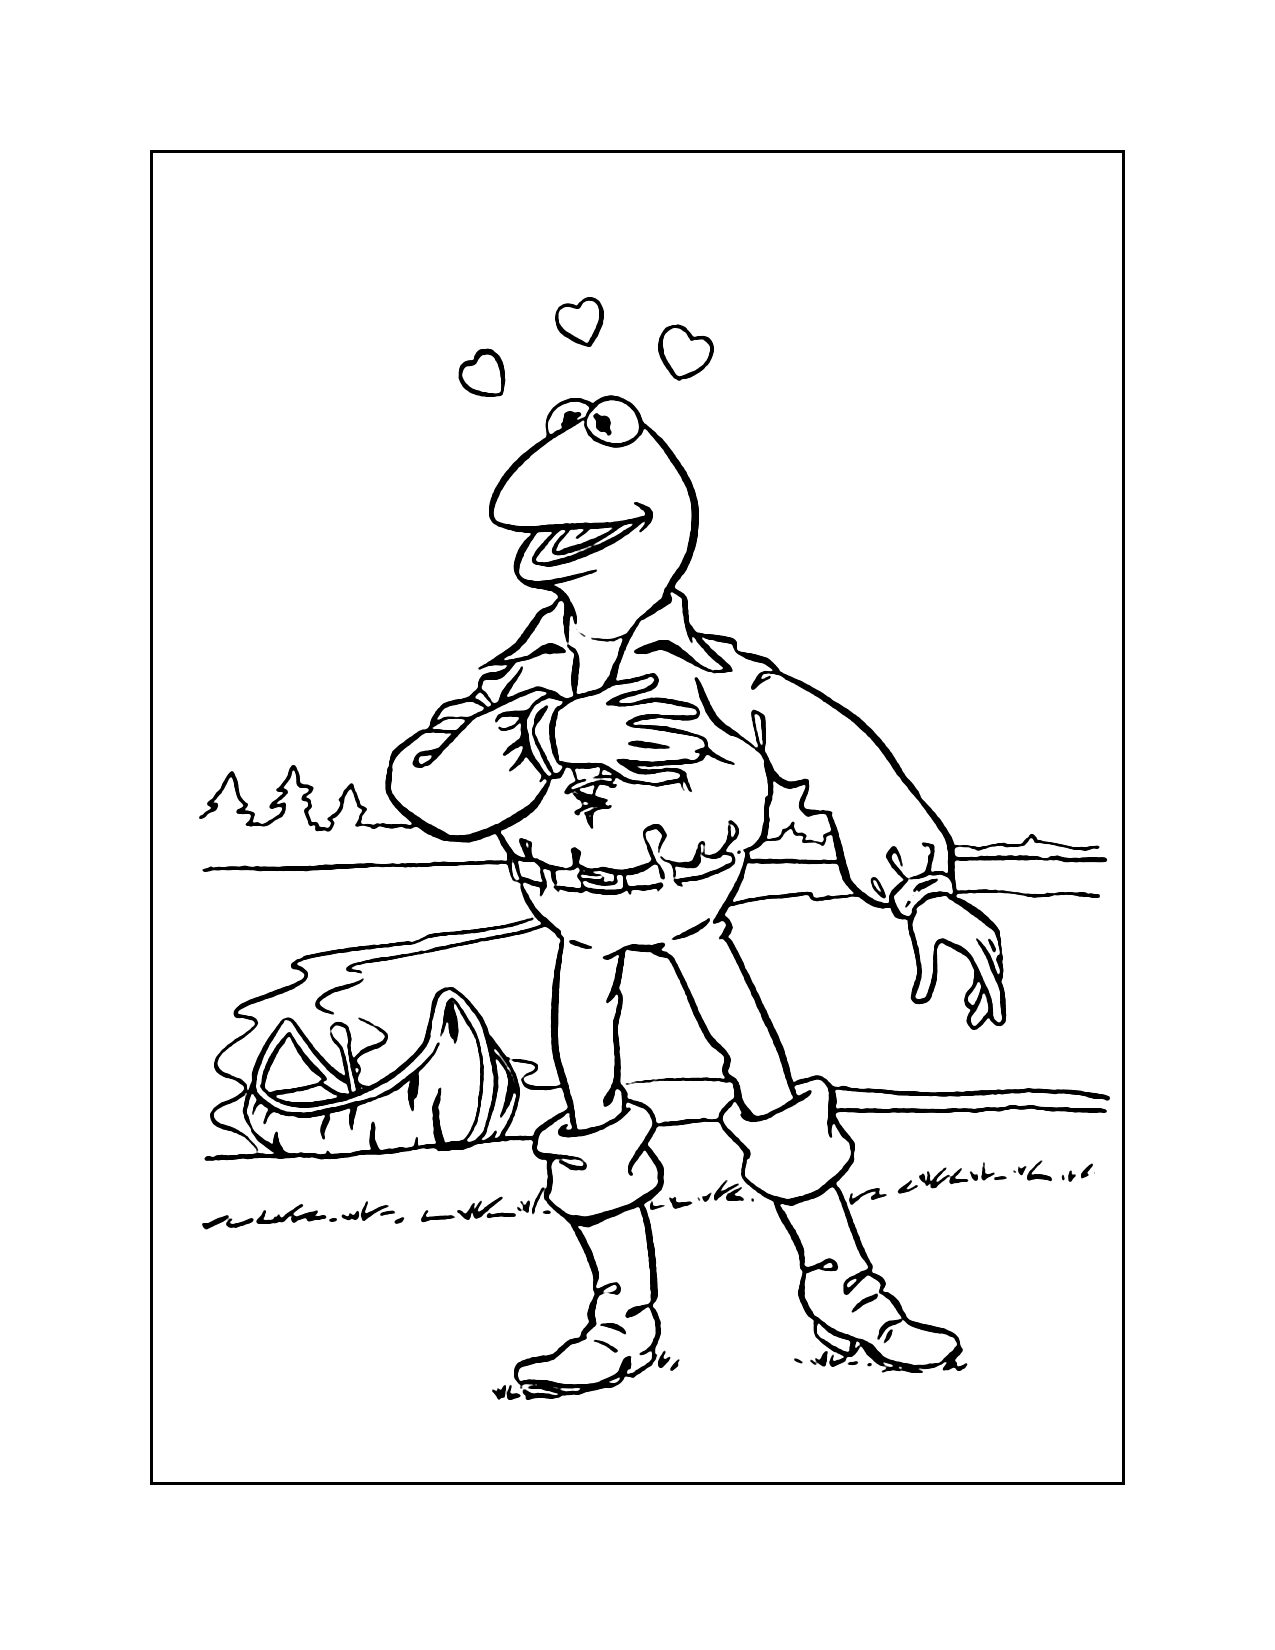 Kermit In Love Coloring Page